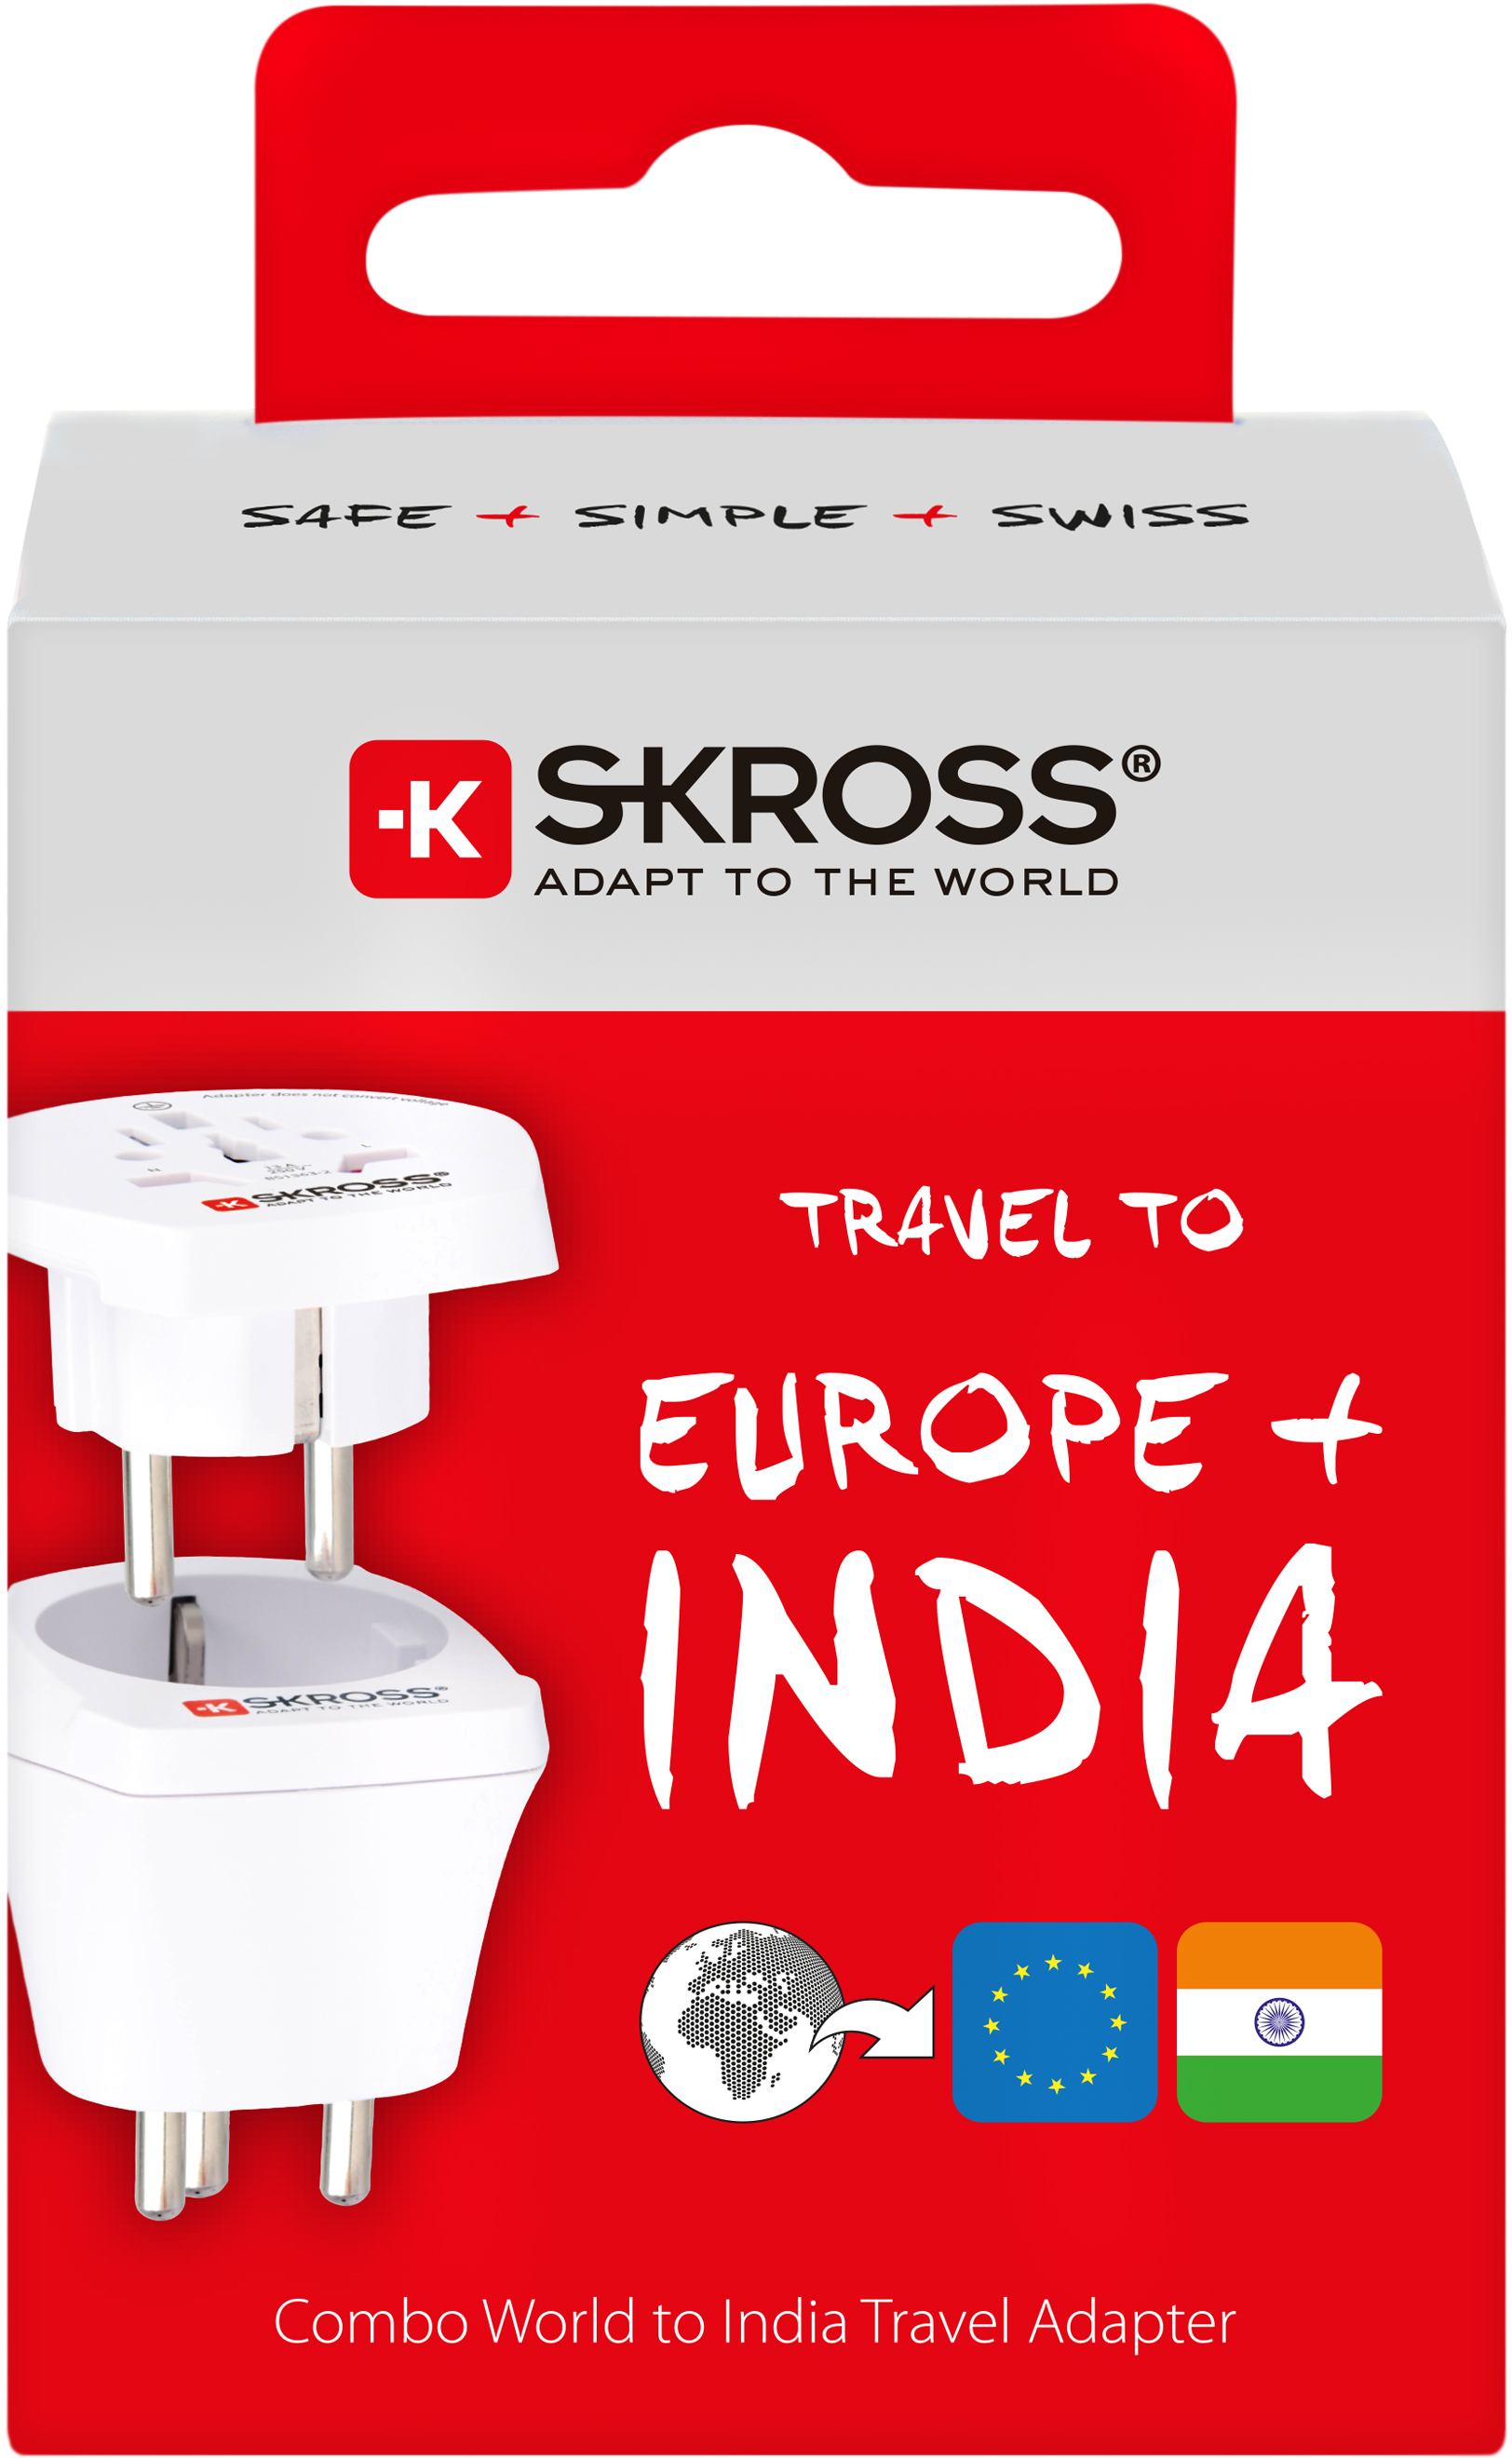 Skross 3-Pole Combo World to India Travel Adapter Packaging